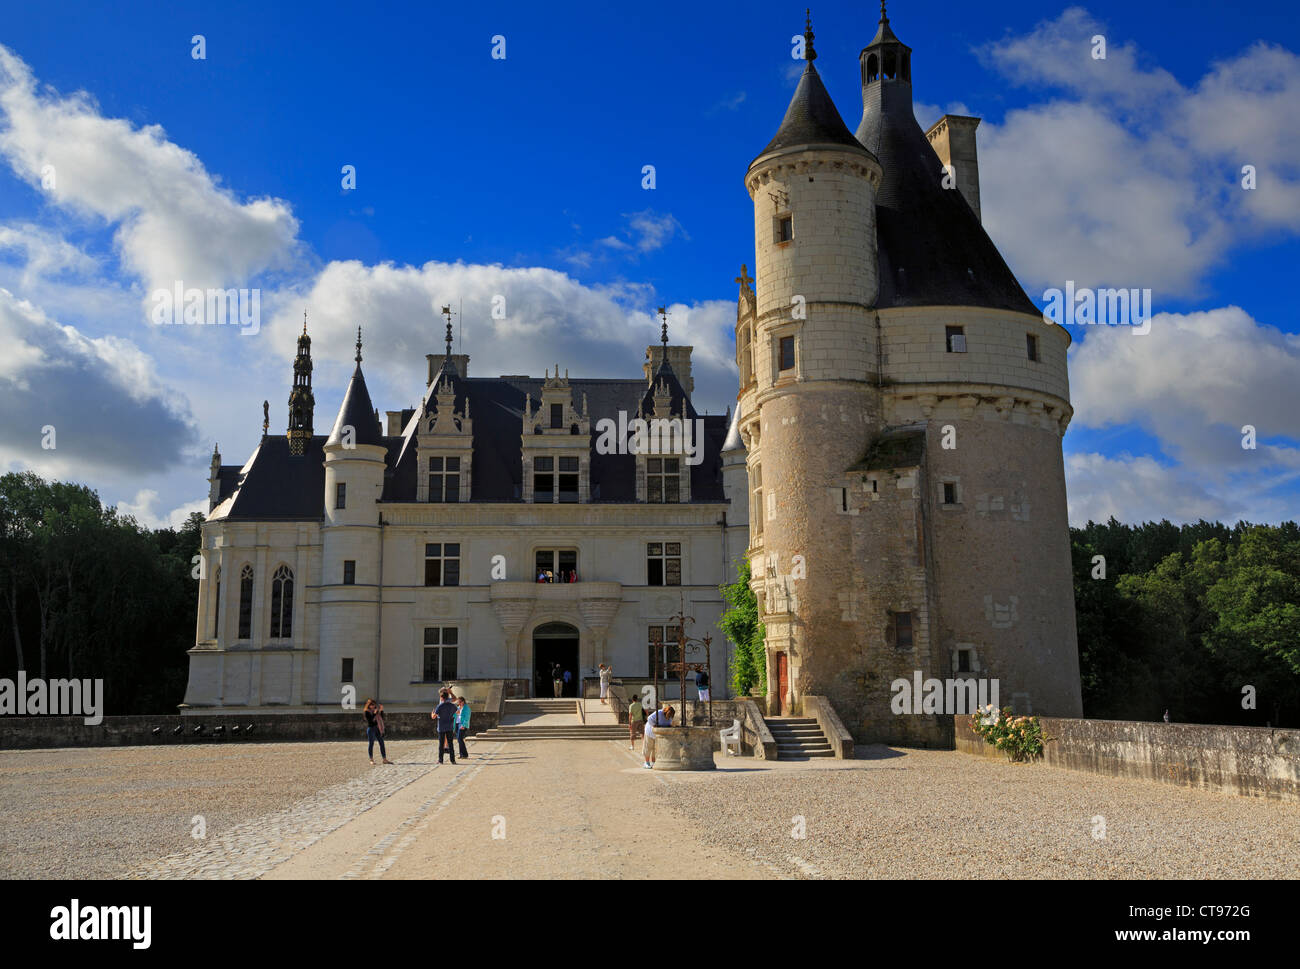 Chateau Chenonceau, Loire Valley, France. Sixteenth century Renaissance chateau on the River Cher. Stock Photo